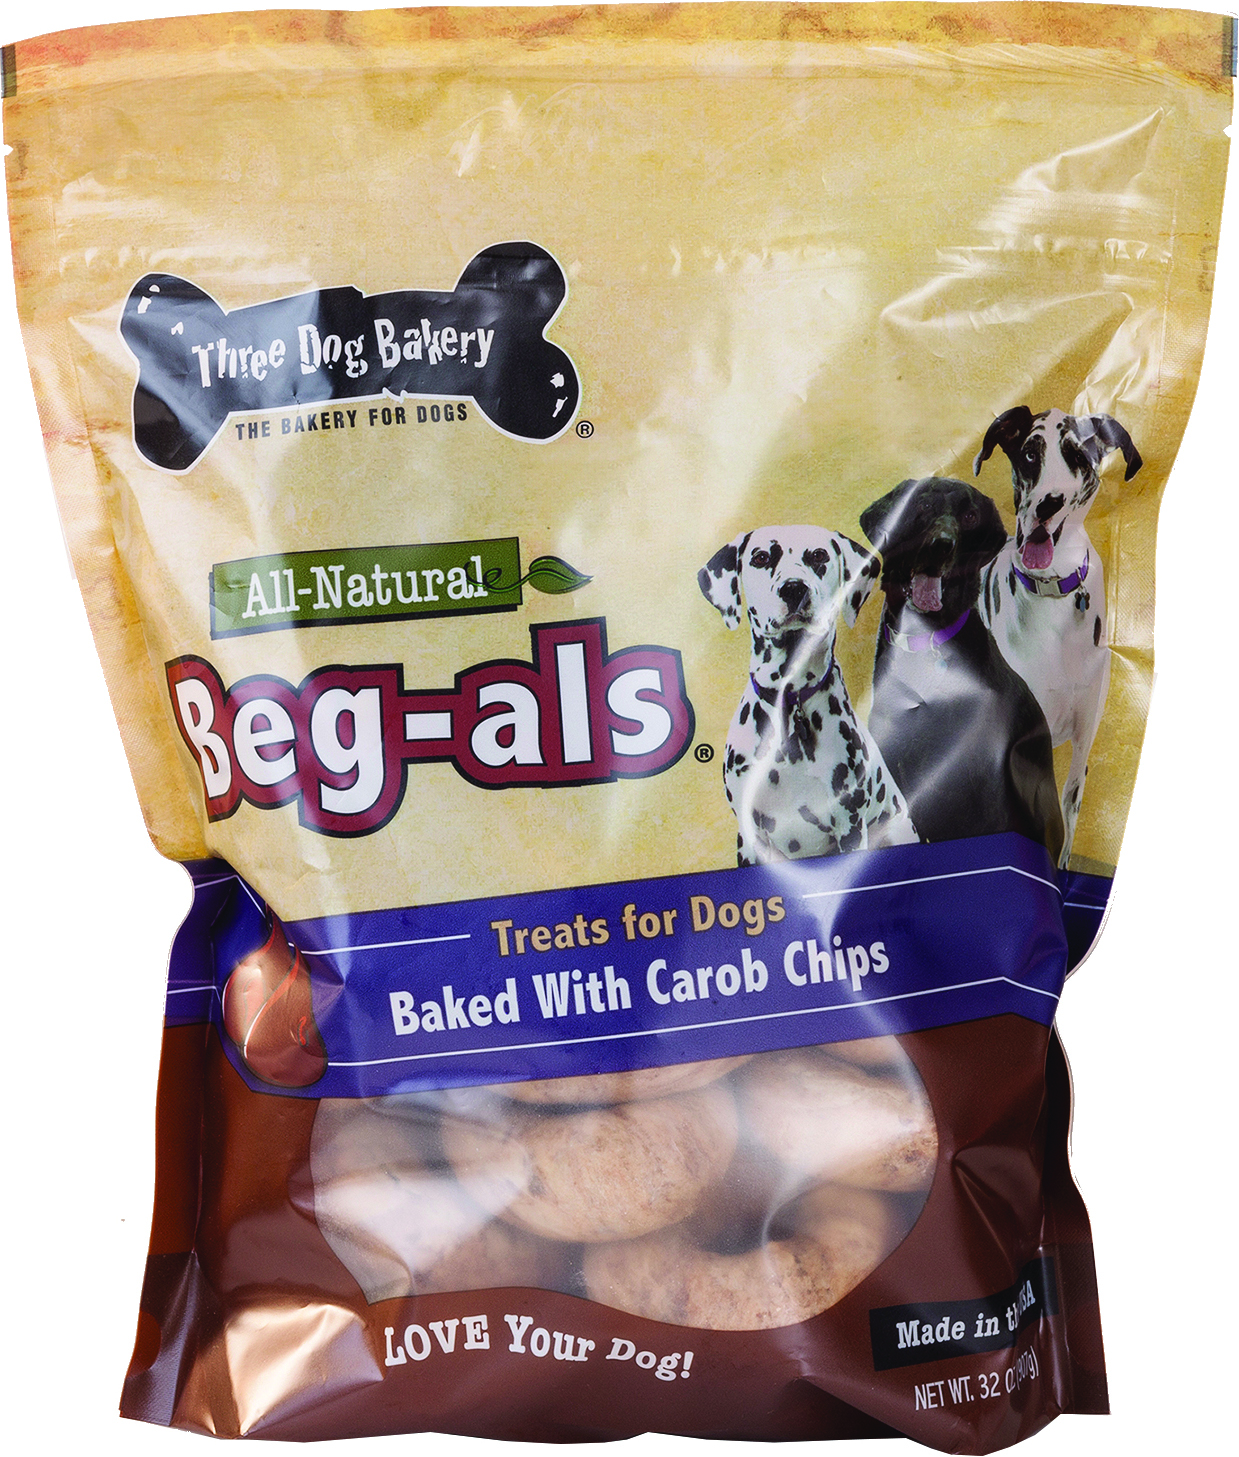 BEG-ALS TREATS FOR DOGS